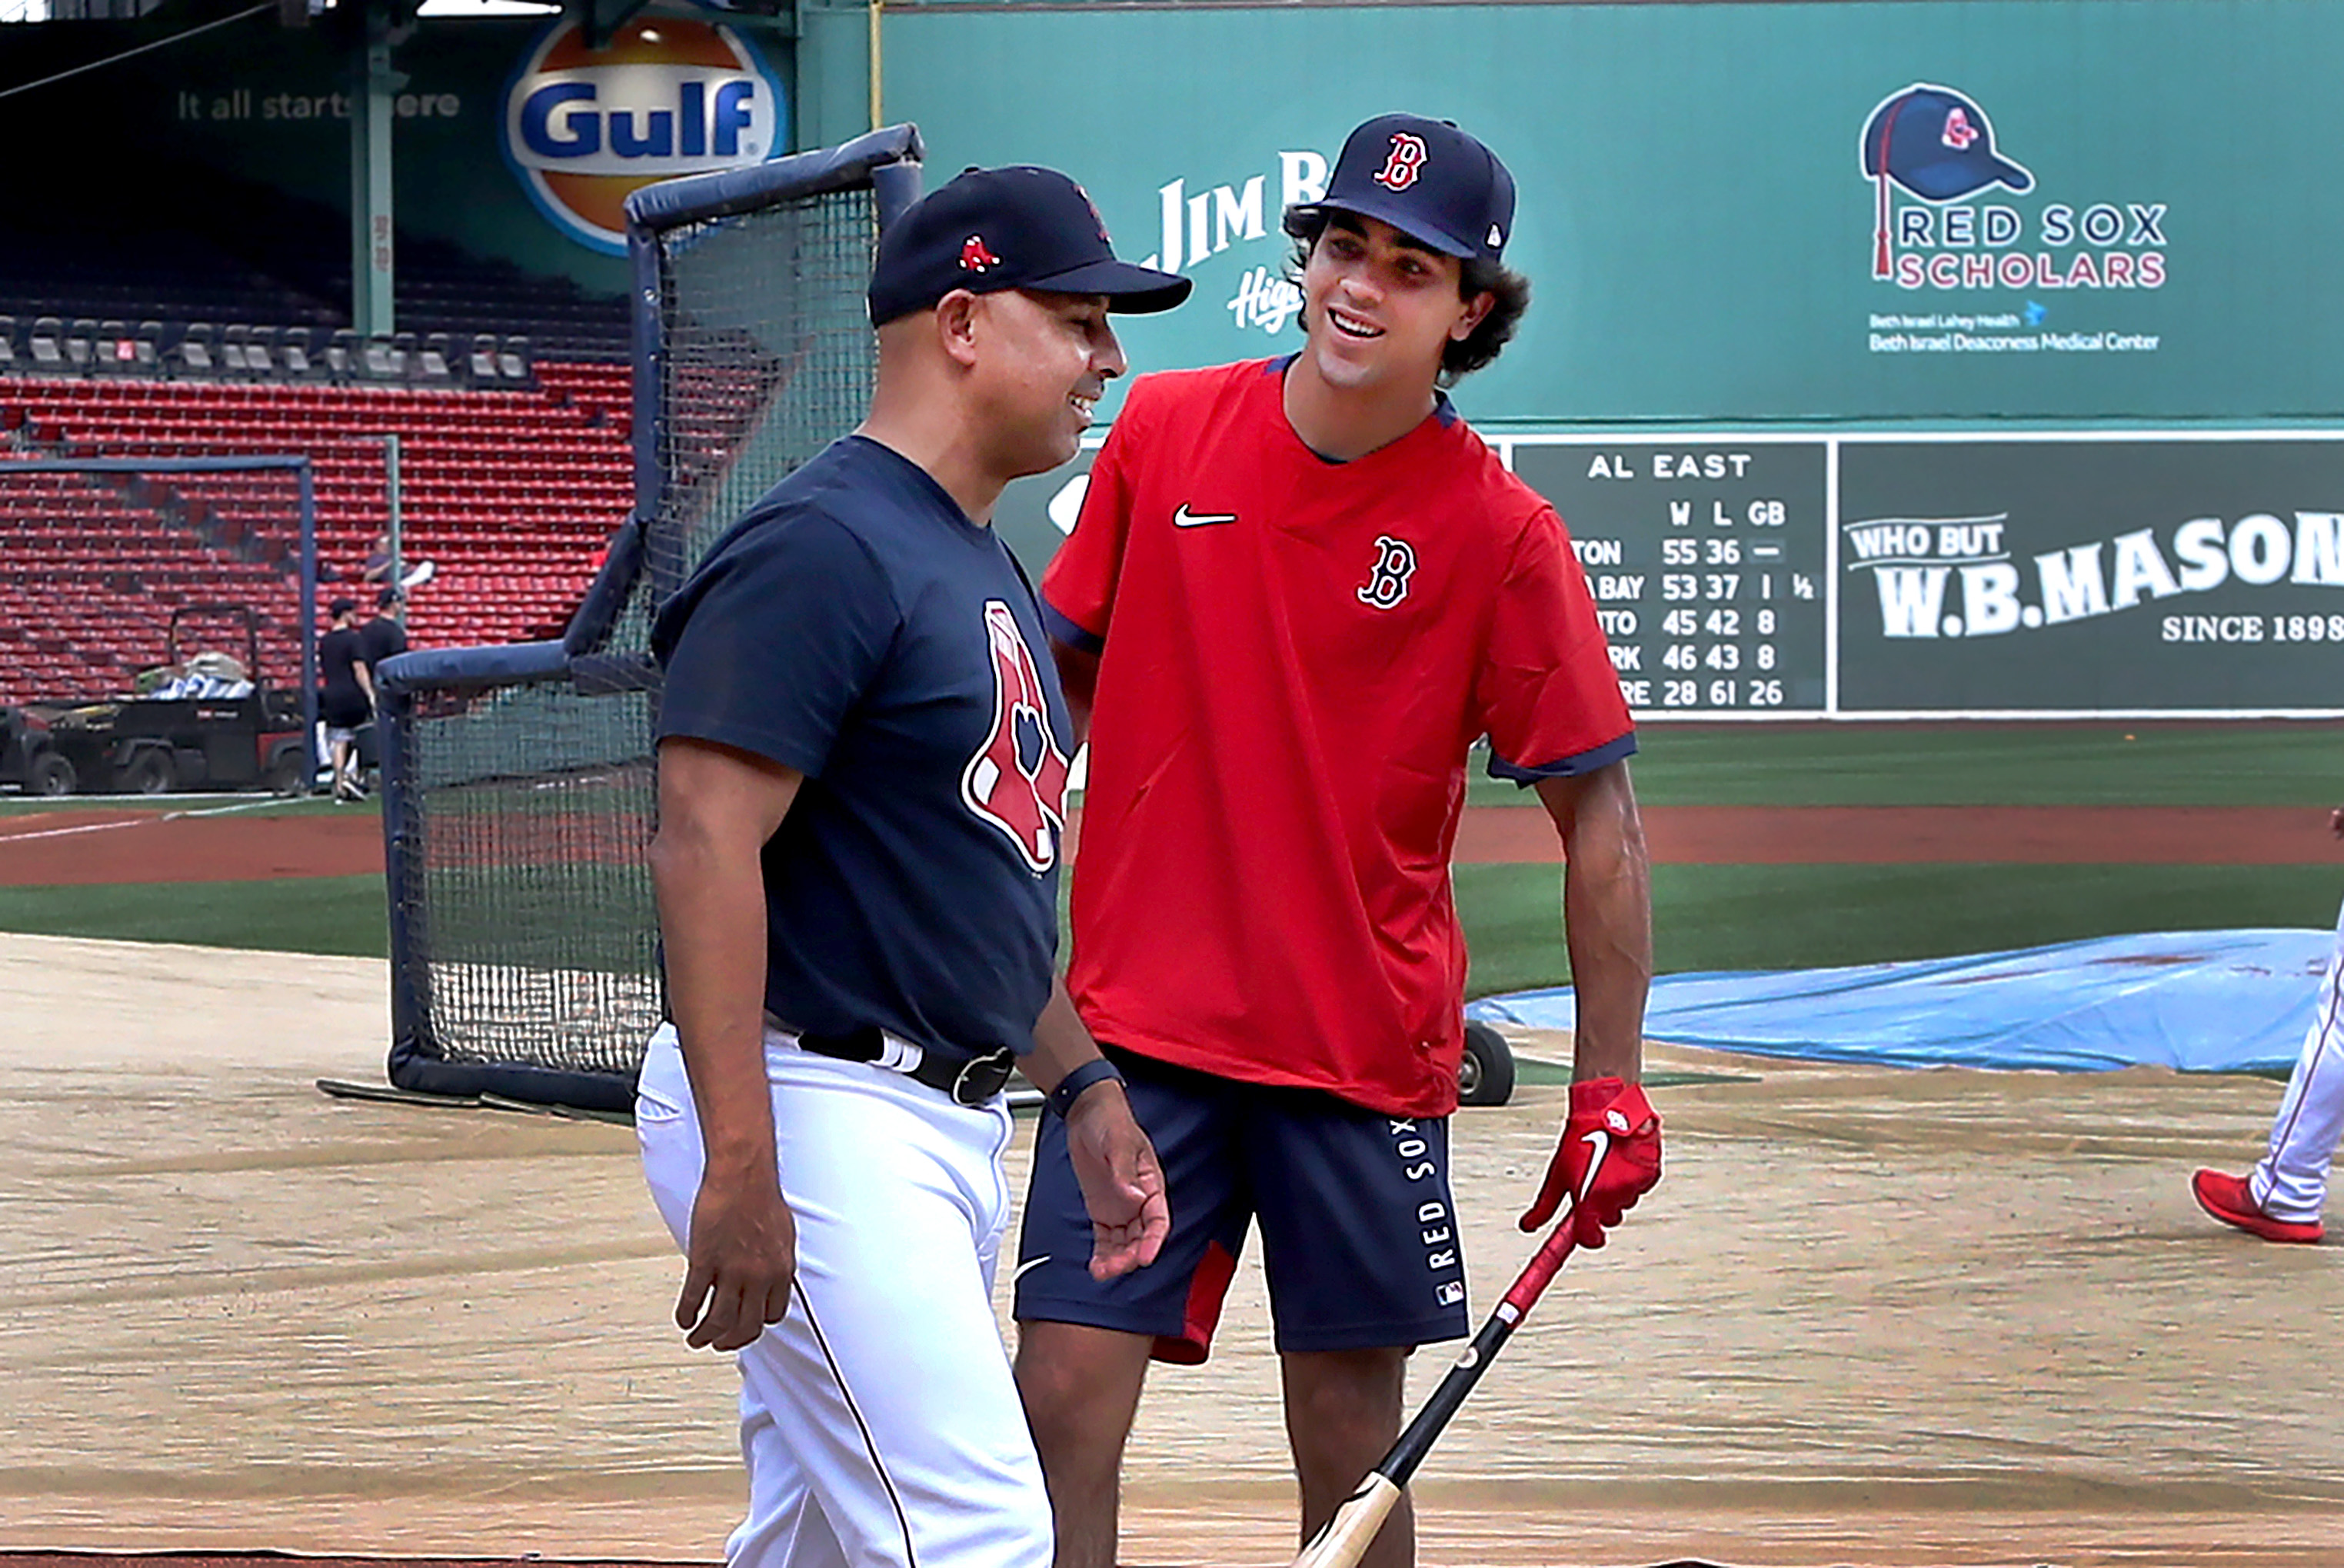 Top Red Sox prospect Marcelo Mayer promoted to Double A after blistering  May - The Athletic